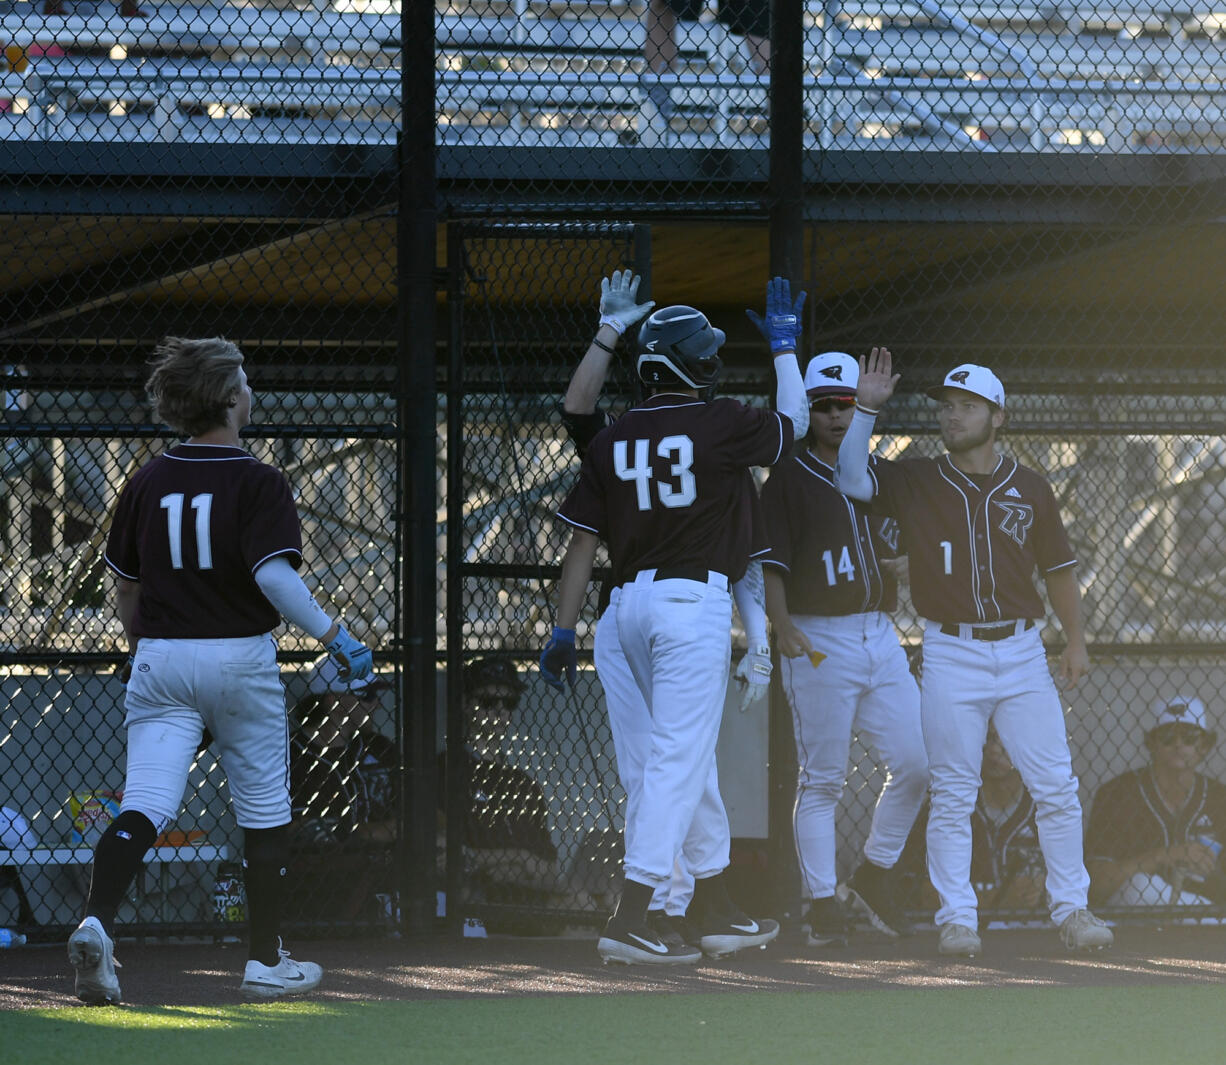 The Raptors dugout celebrates with left fielder Alex Sepulveda (43) and Nate Kirkpatrick (11) after a run was scored Tuesday, July 12, 2022, during a game between the Ridgefield Raptors and the Bellingham Bells at the Ridgefield Outdoor Recreation Complex.